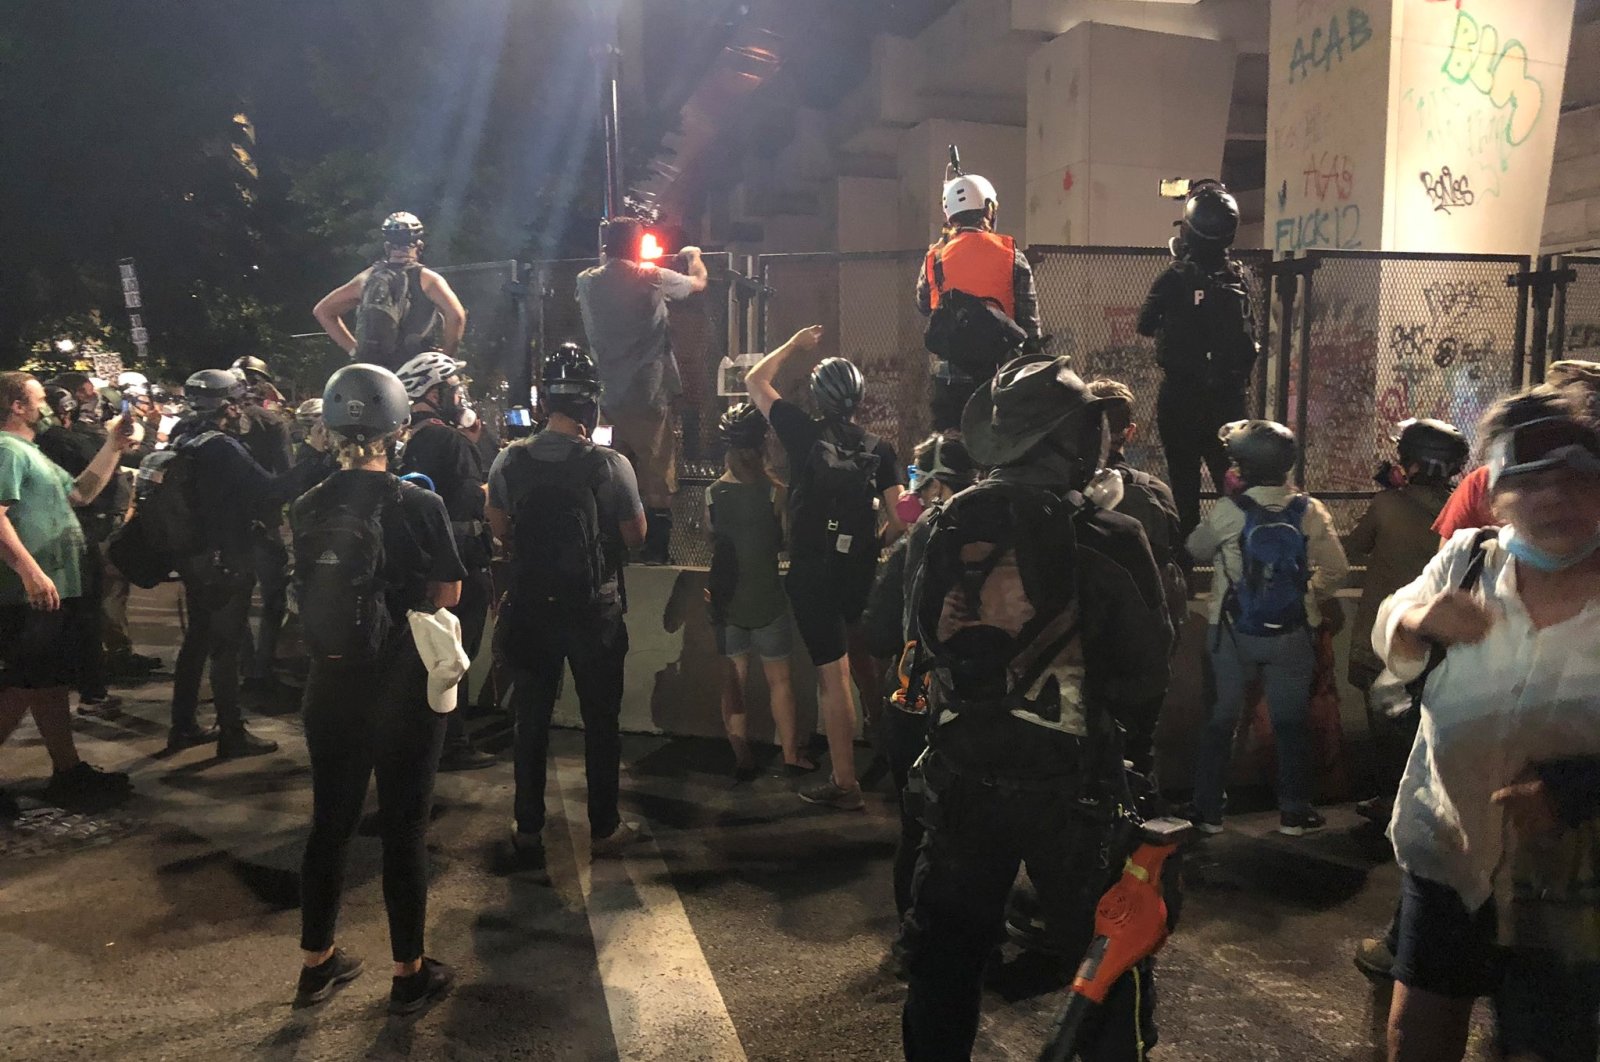 US federal agents use tear gas to clear rowdy Portland protest | Daily ...